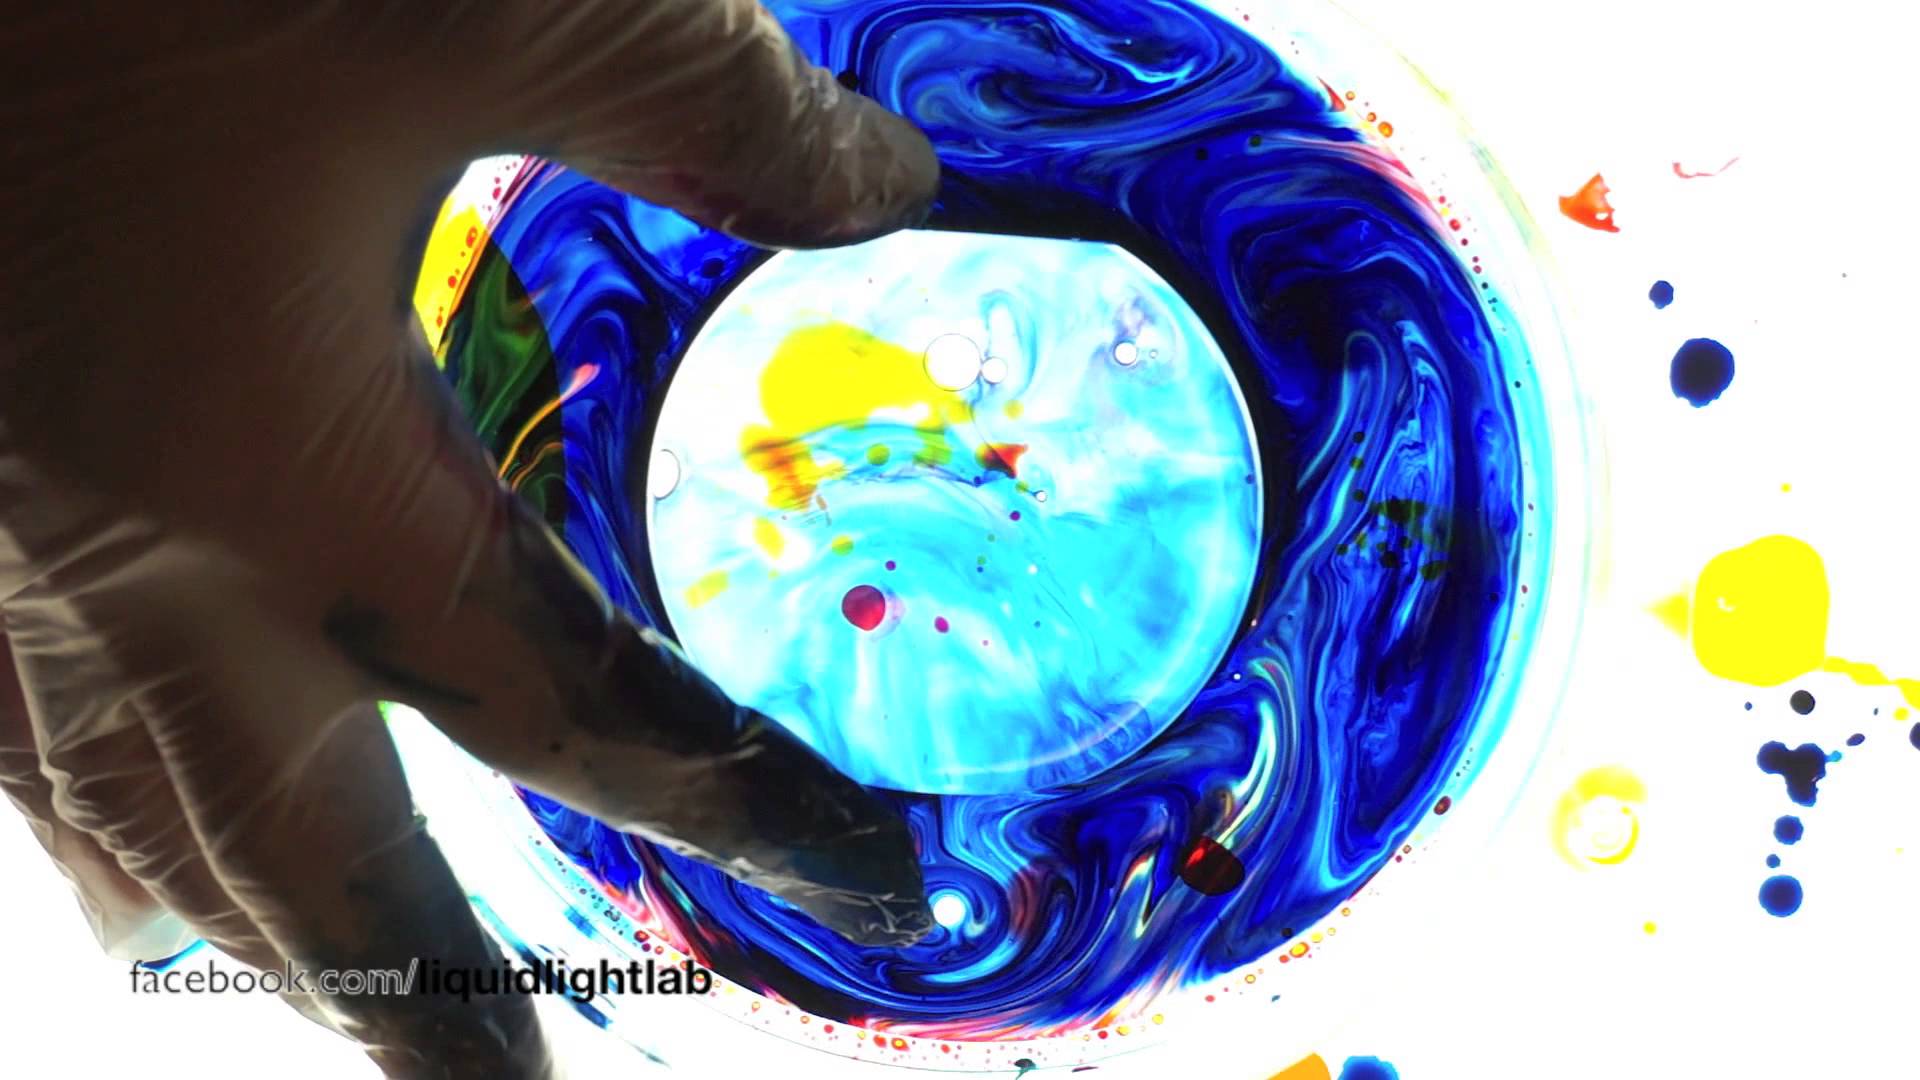 12 Minutes of Live Oil and Water Art in 1 and 1/2 Minutes - 1080 HD ...